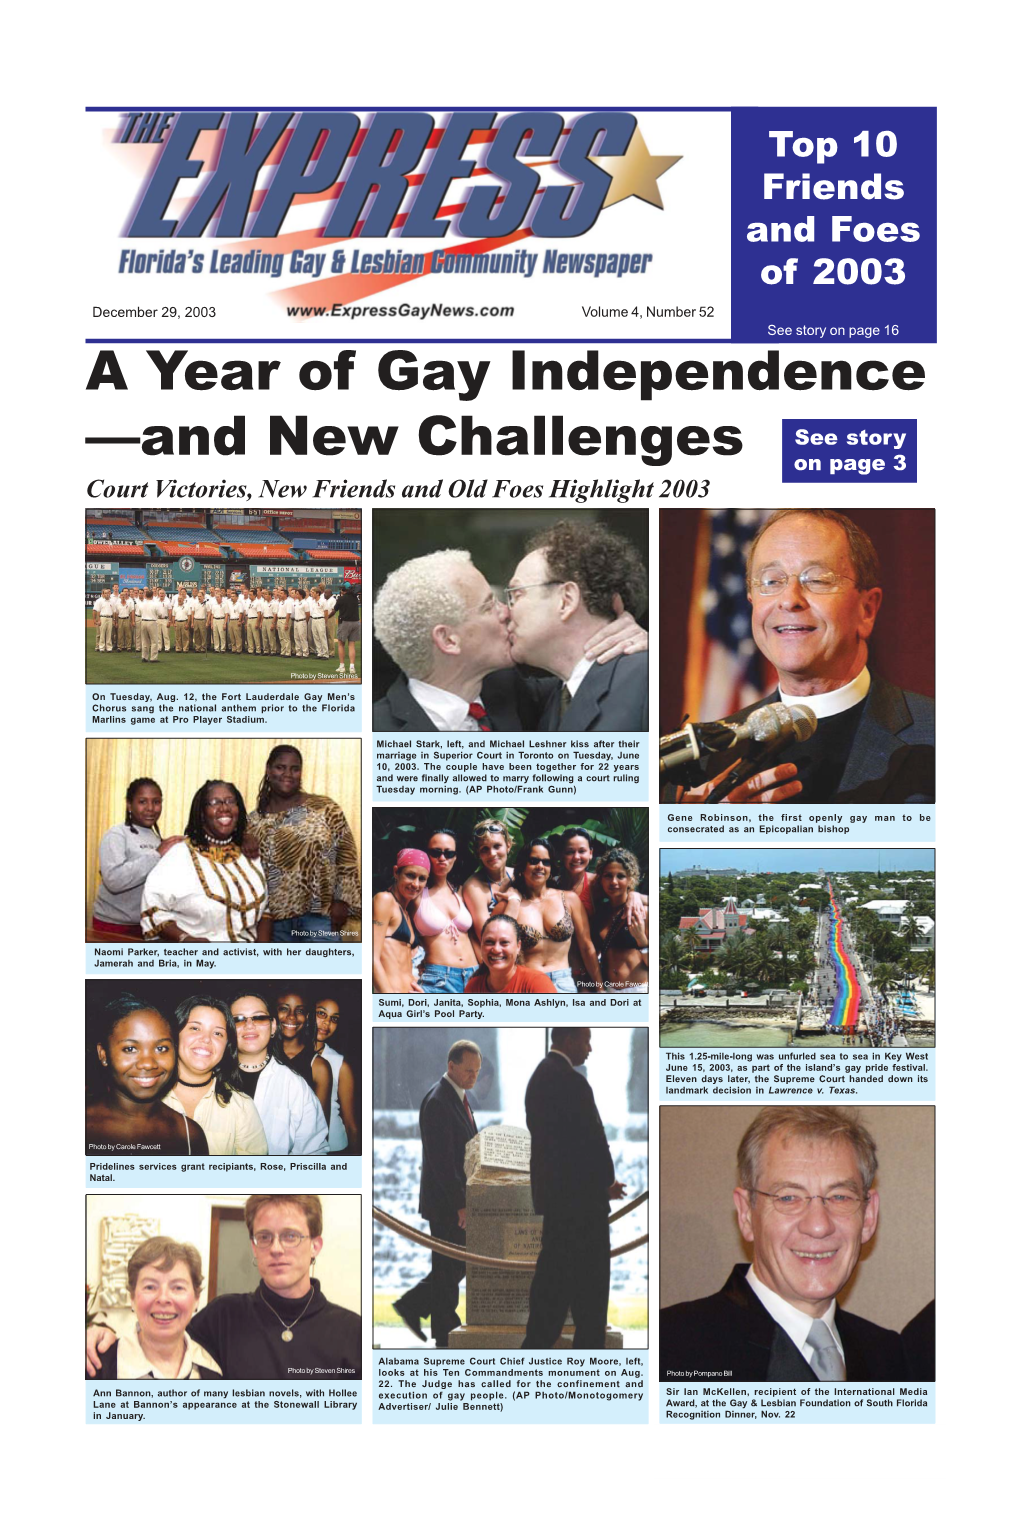 A Year of Gay Independence